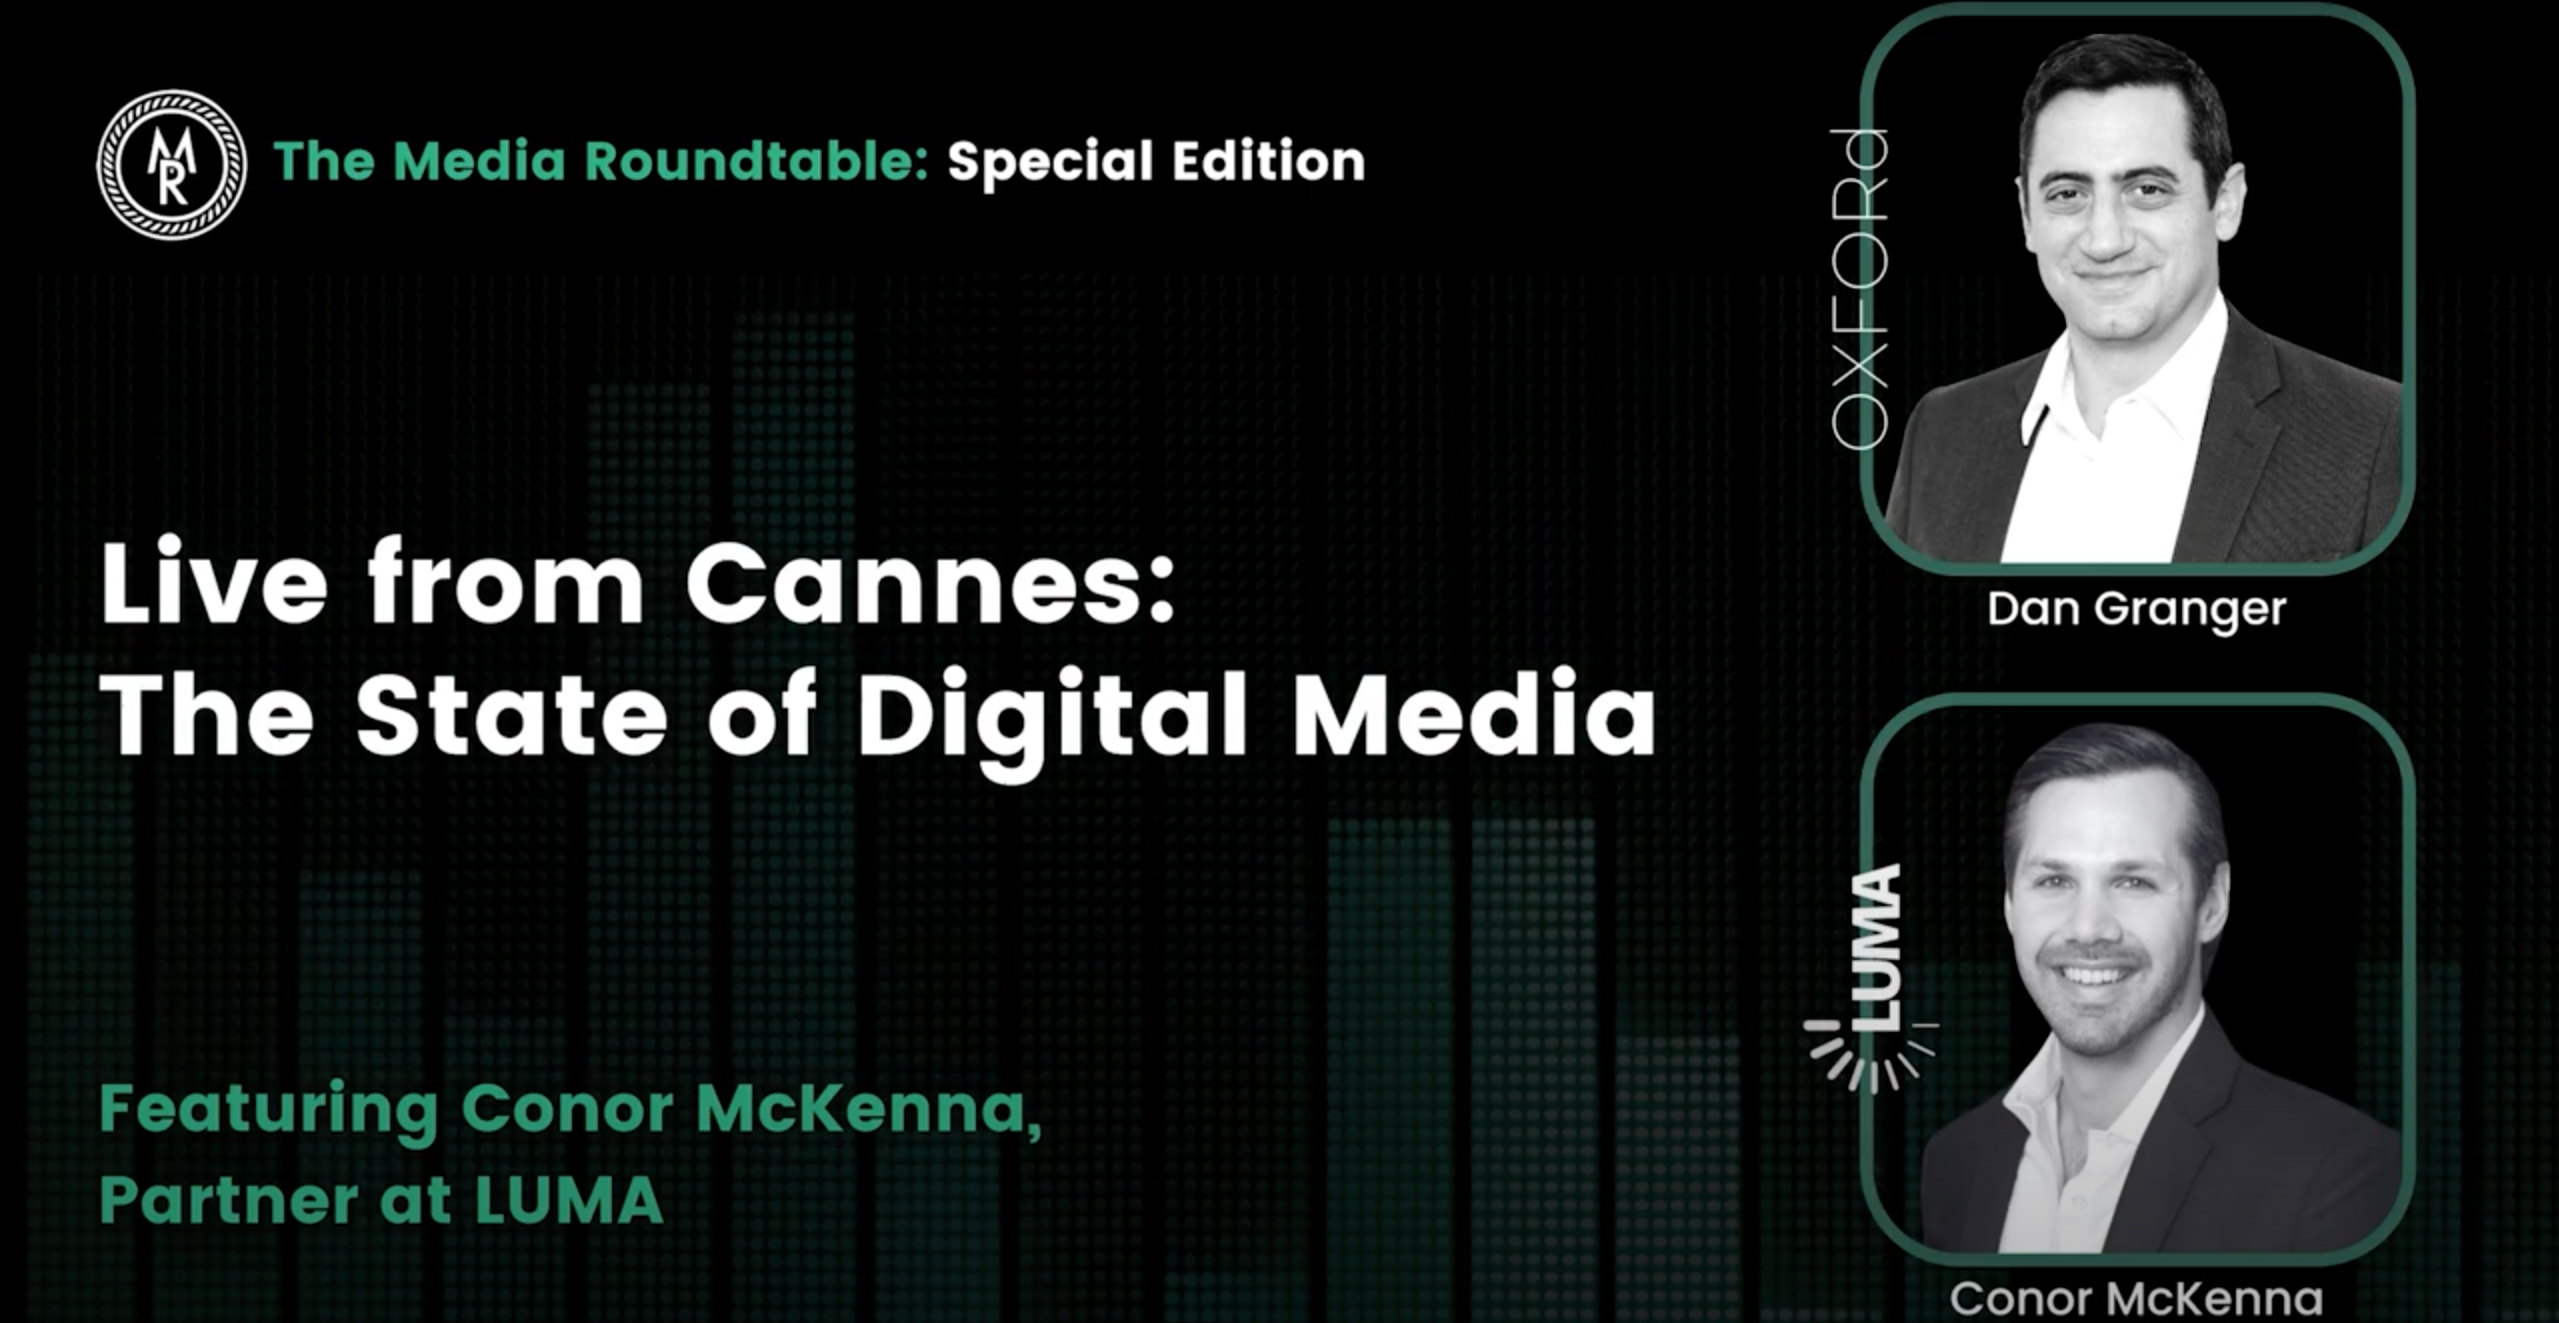 Oxford Road_The Media Roundtable w/ Conor McKenna